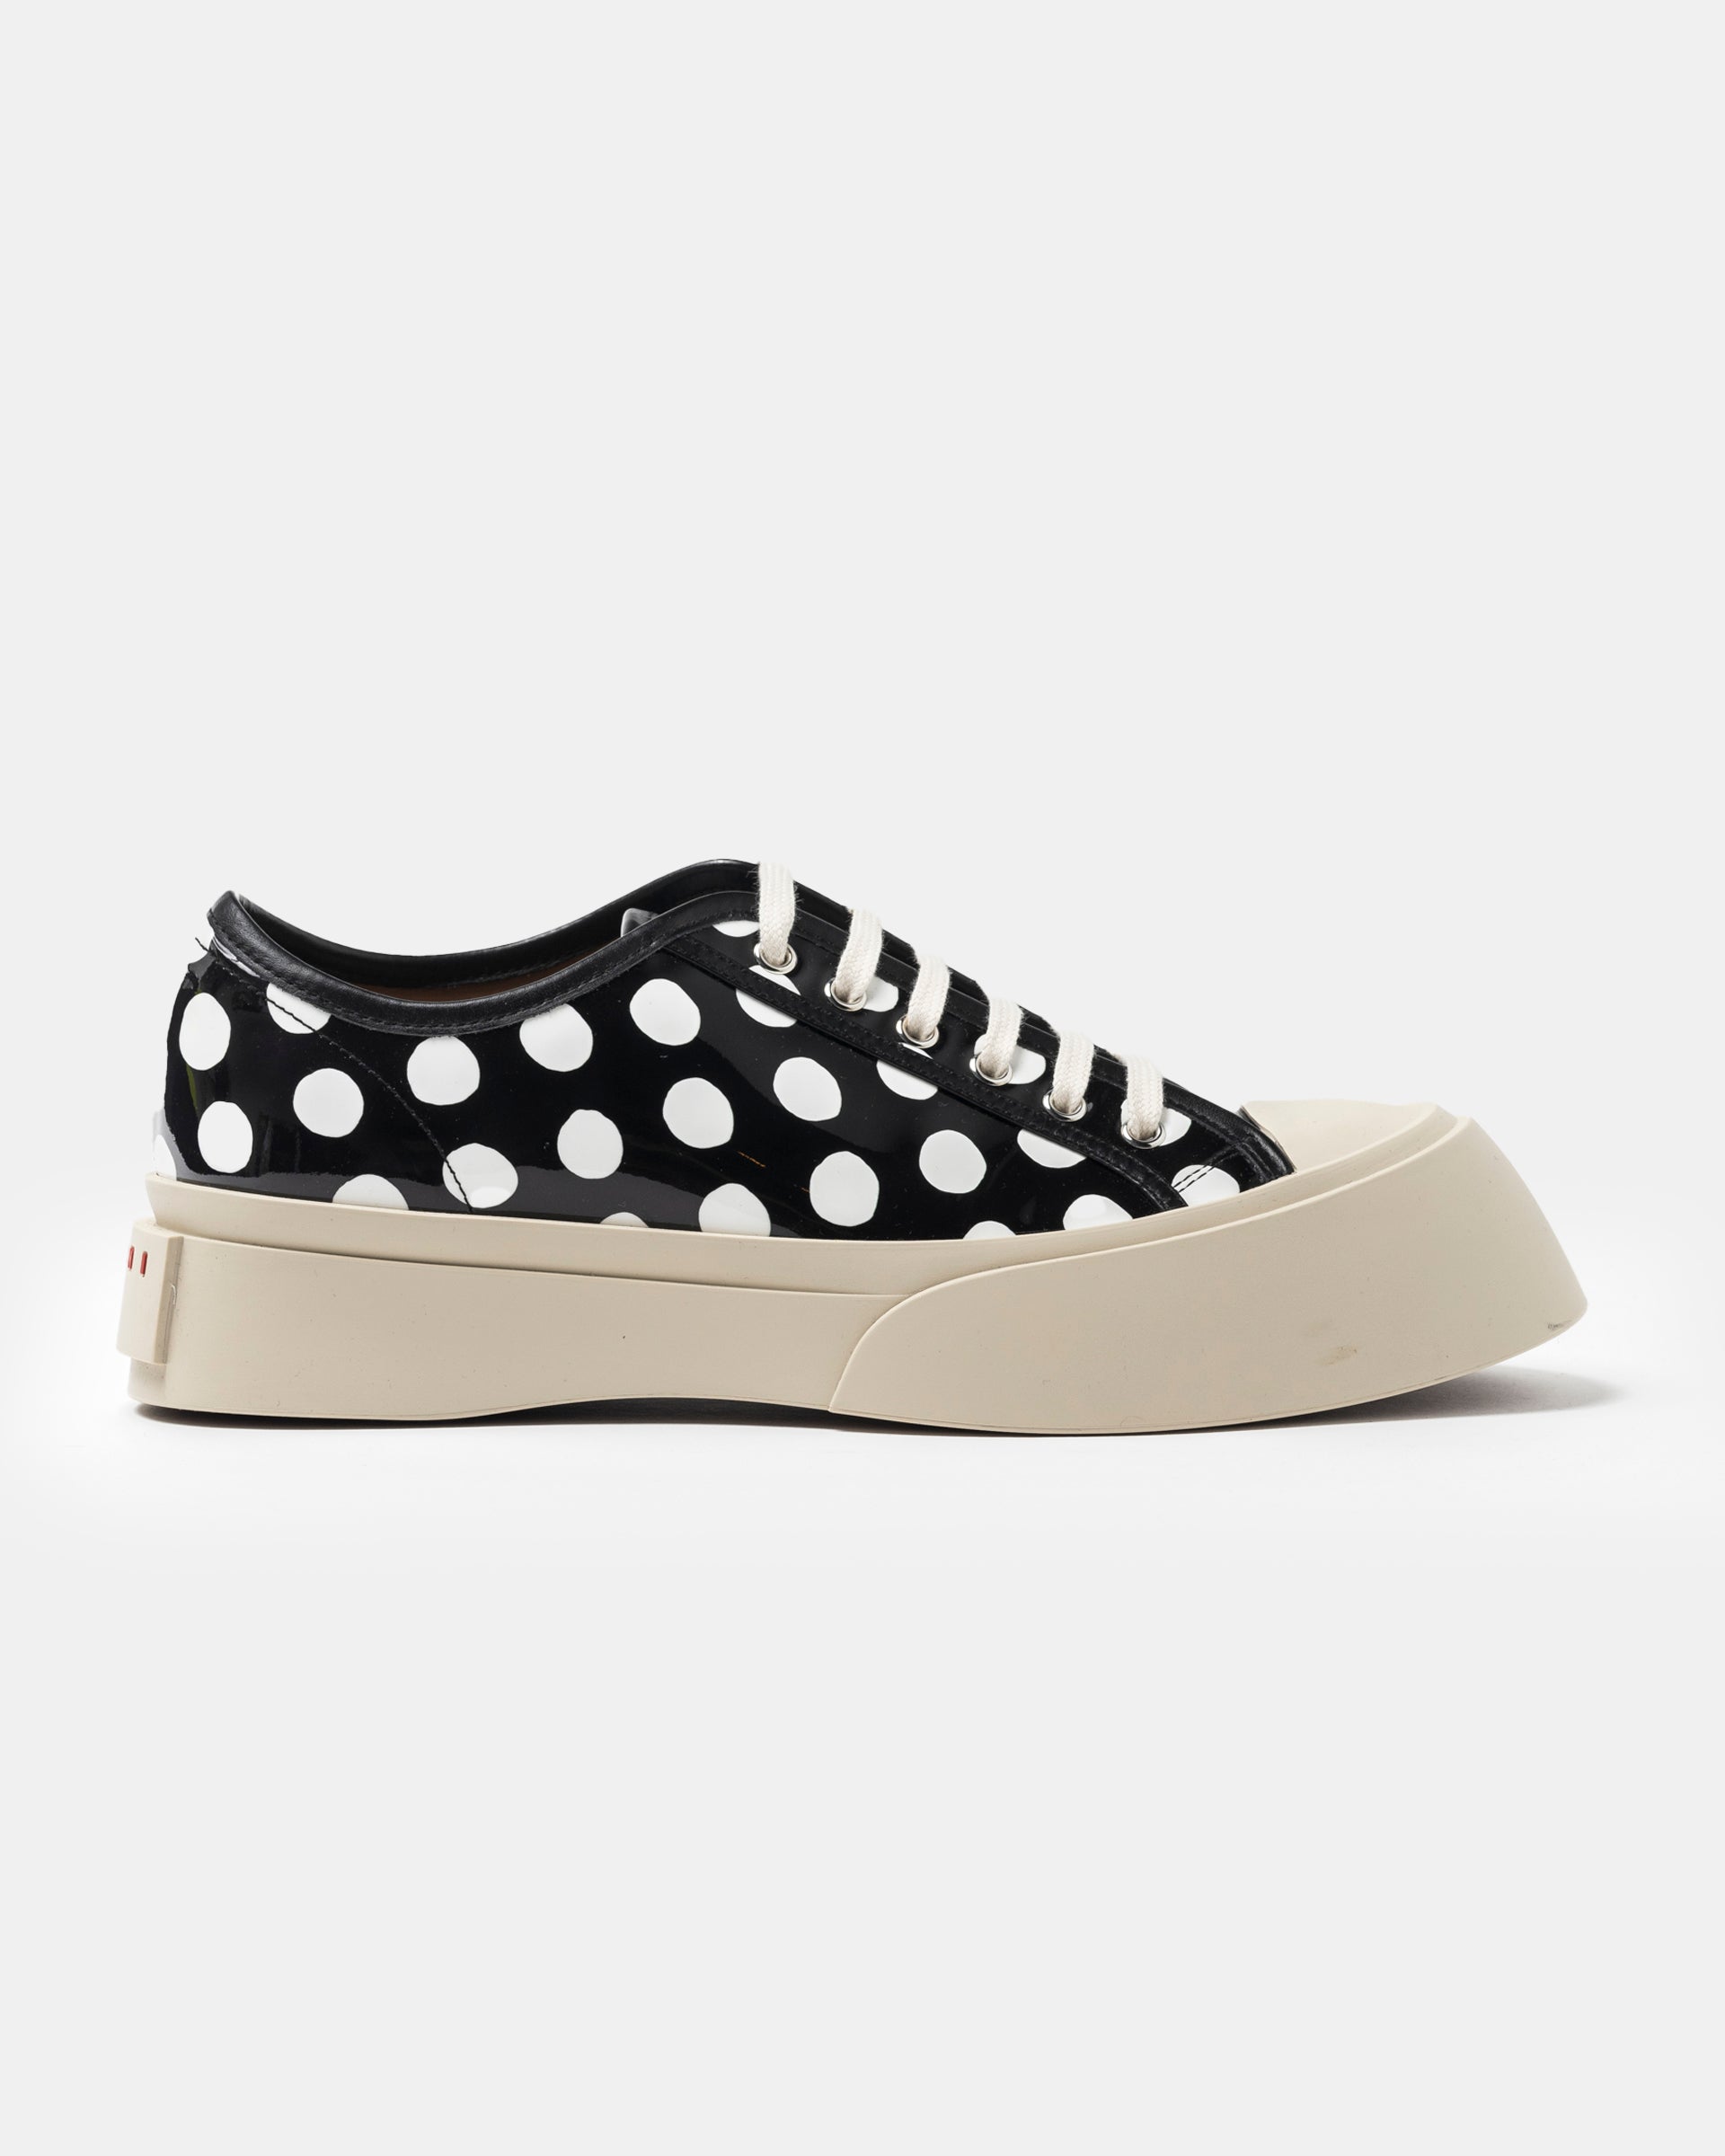 Pablo Lace-Up in Black and White Spot